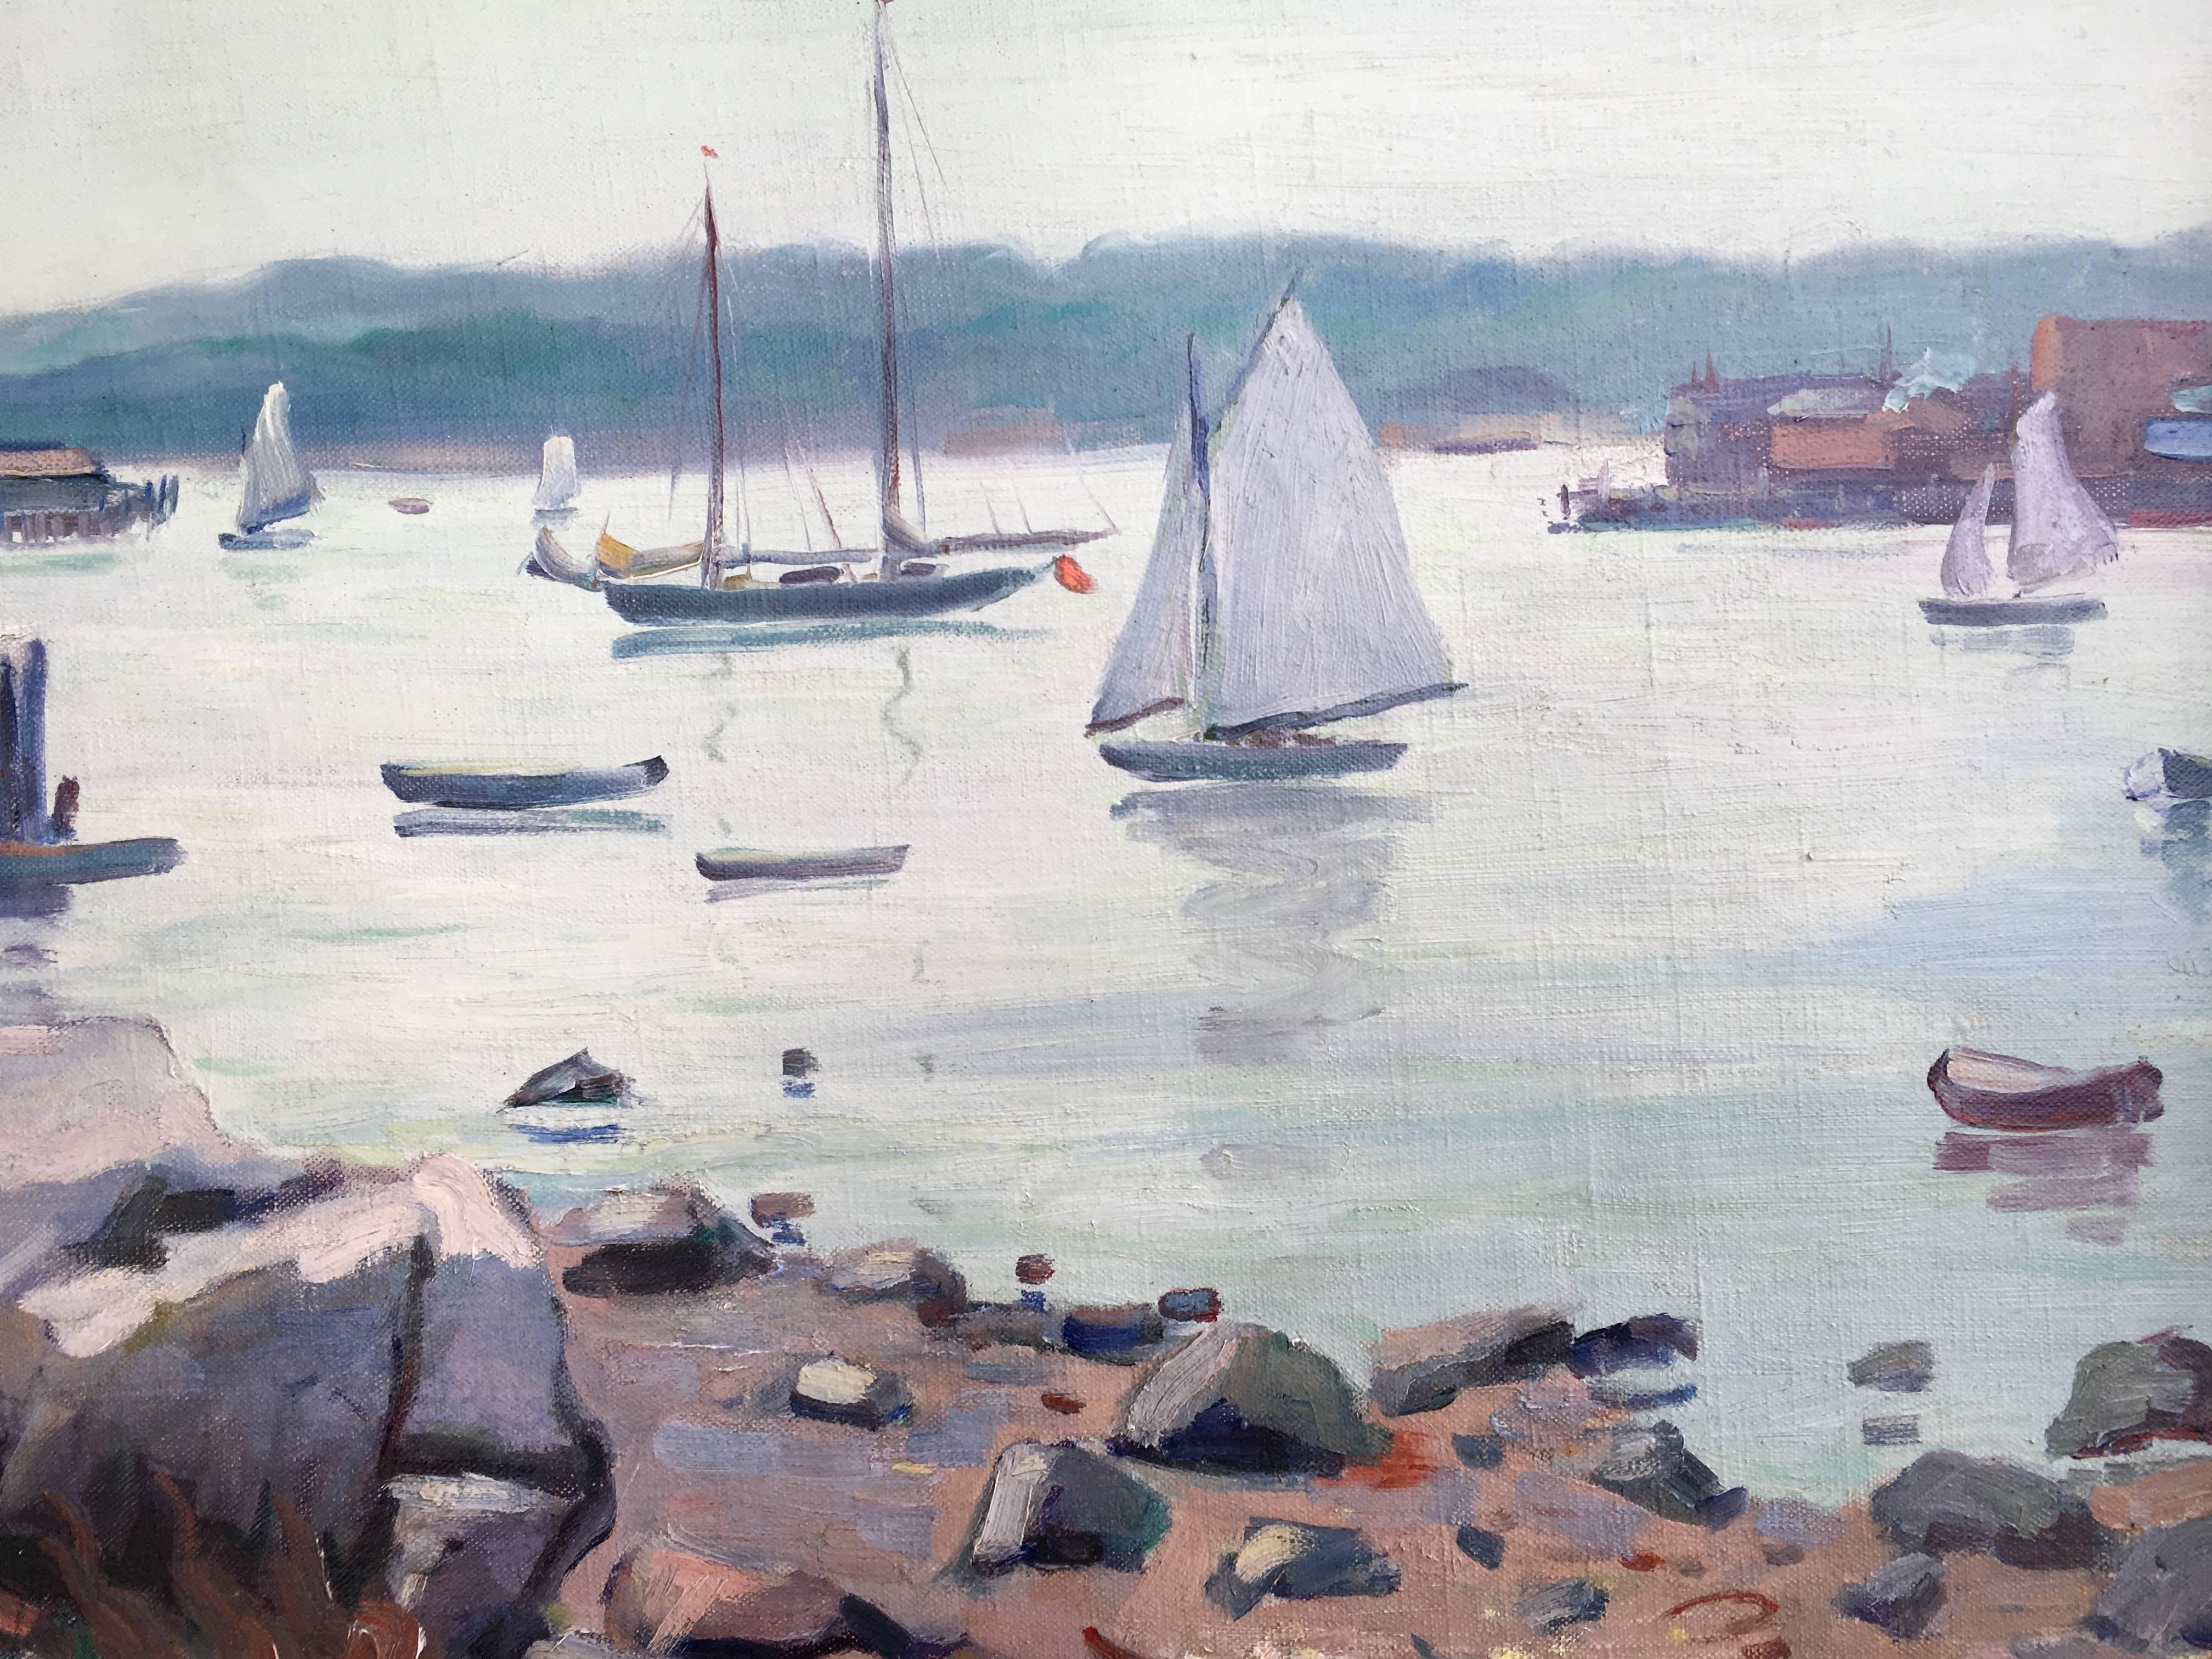 Glauscester Harbor - Painting by Tunis Ponsen